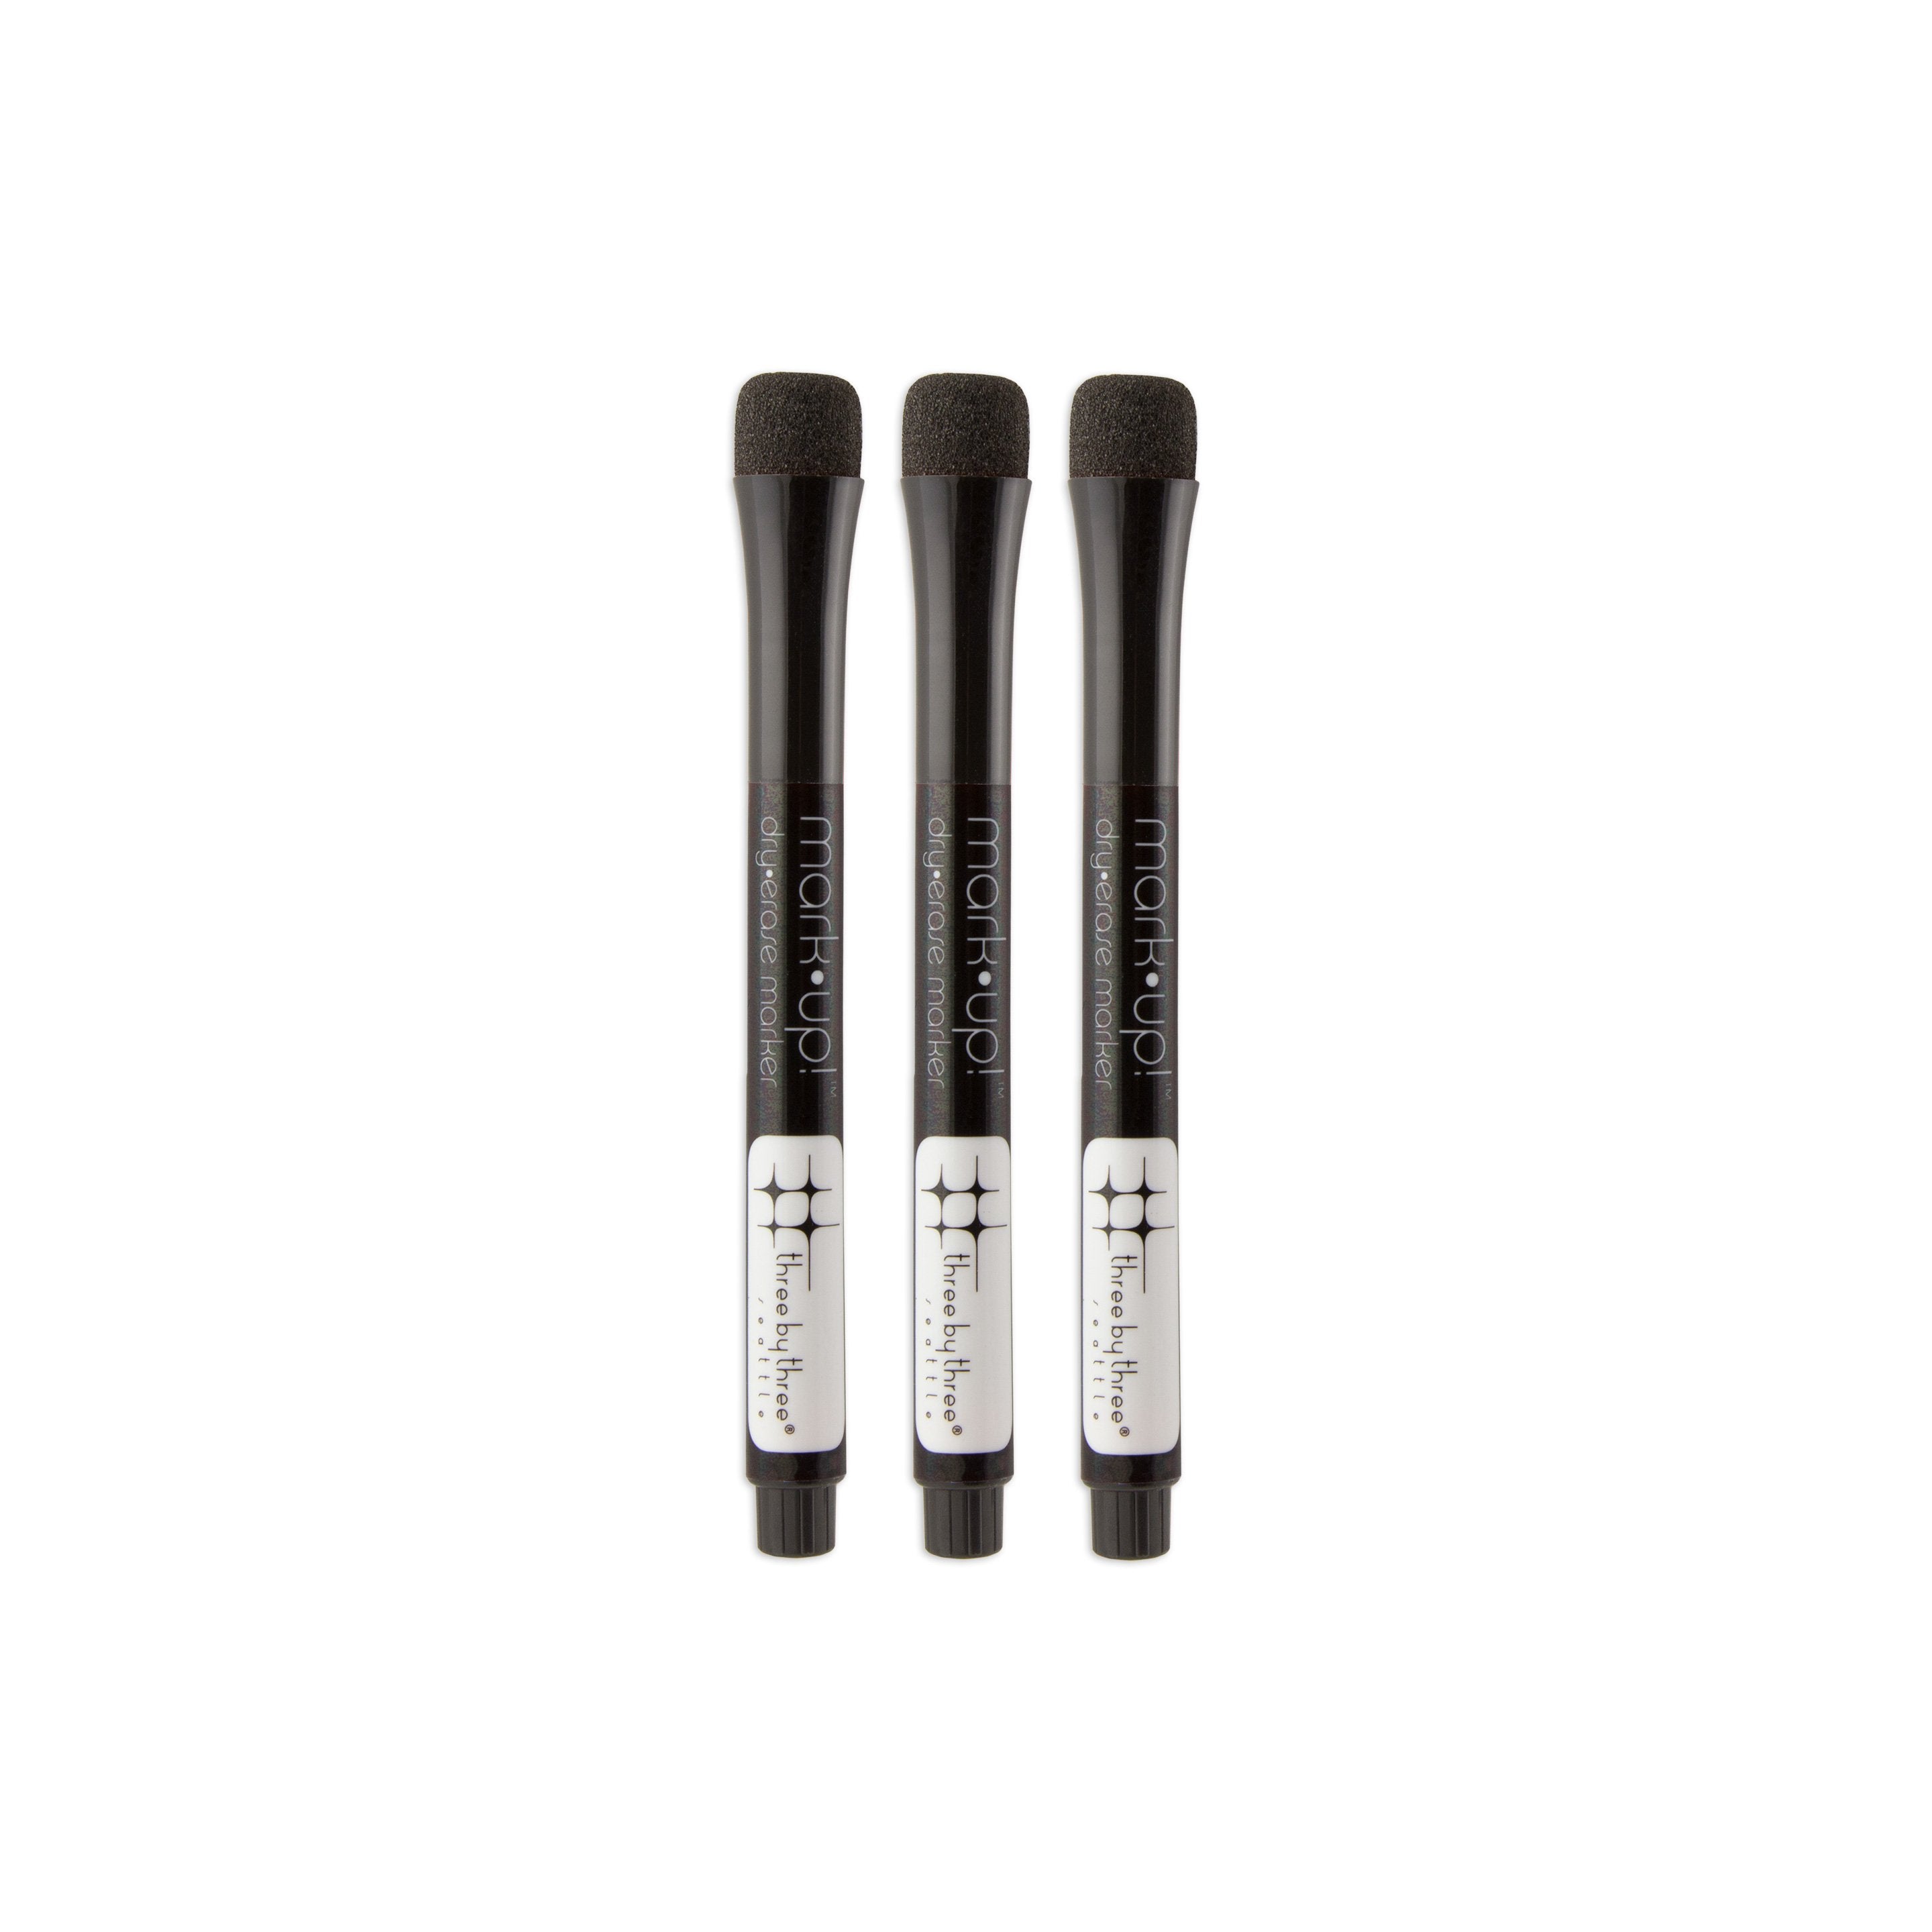 Dry Erase Markers - Set of 3 | Style Me Pretty